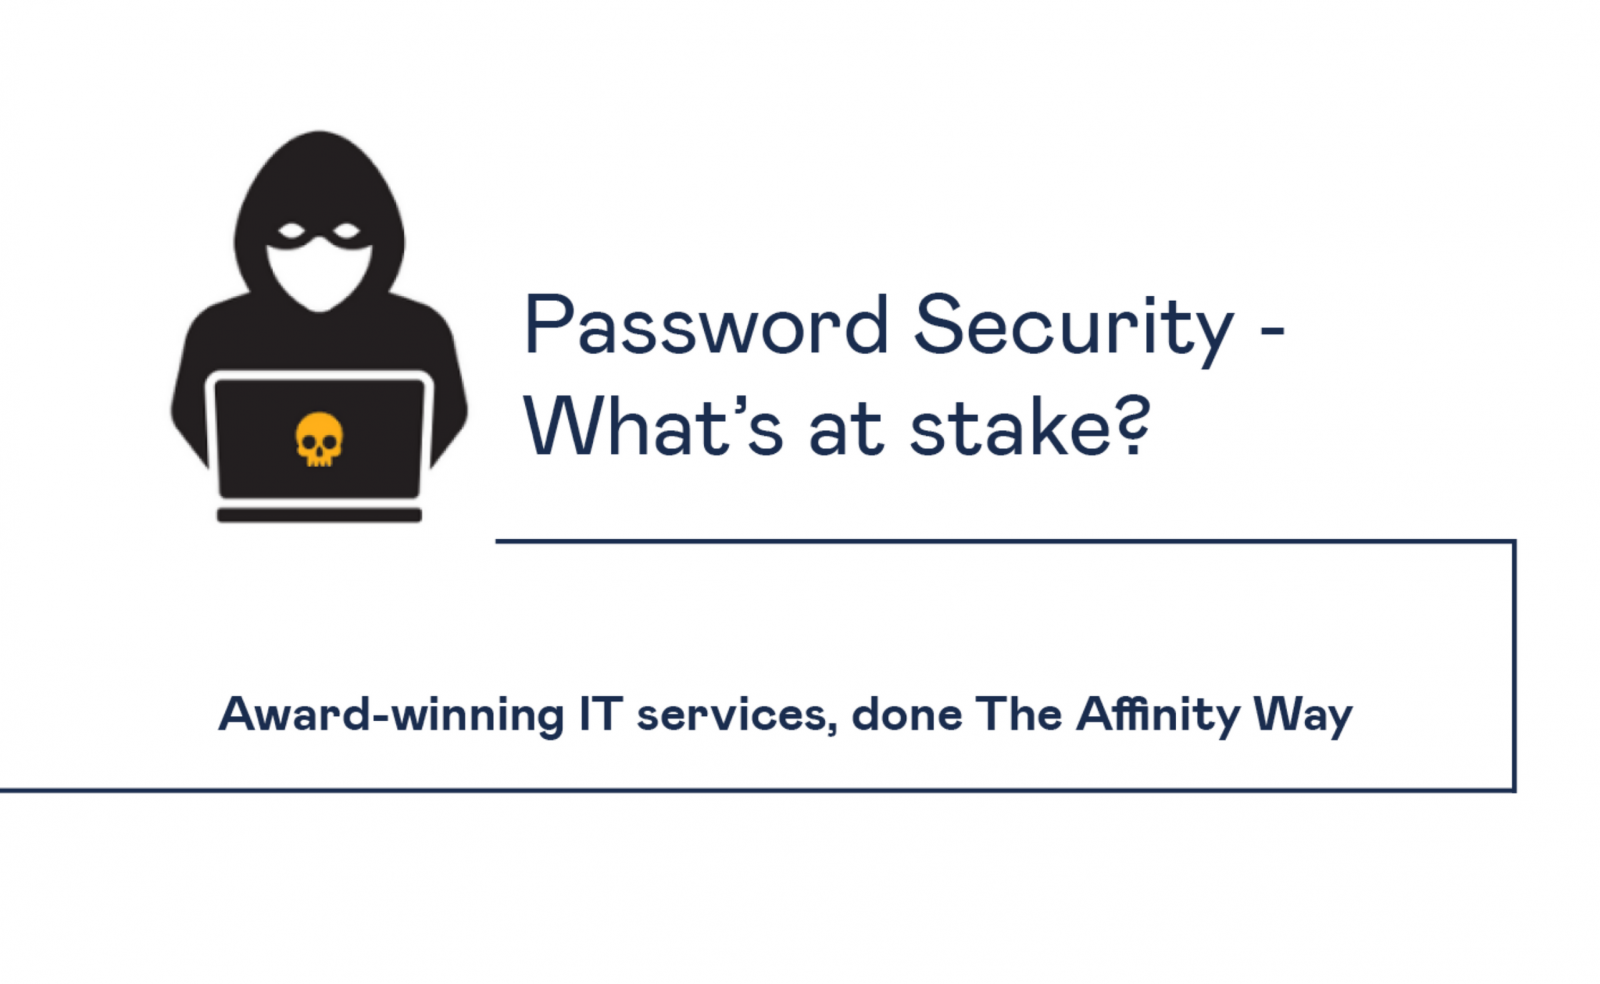 Password Security - What's at Stake?